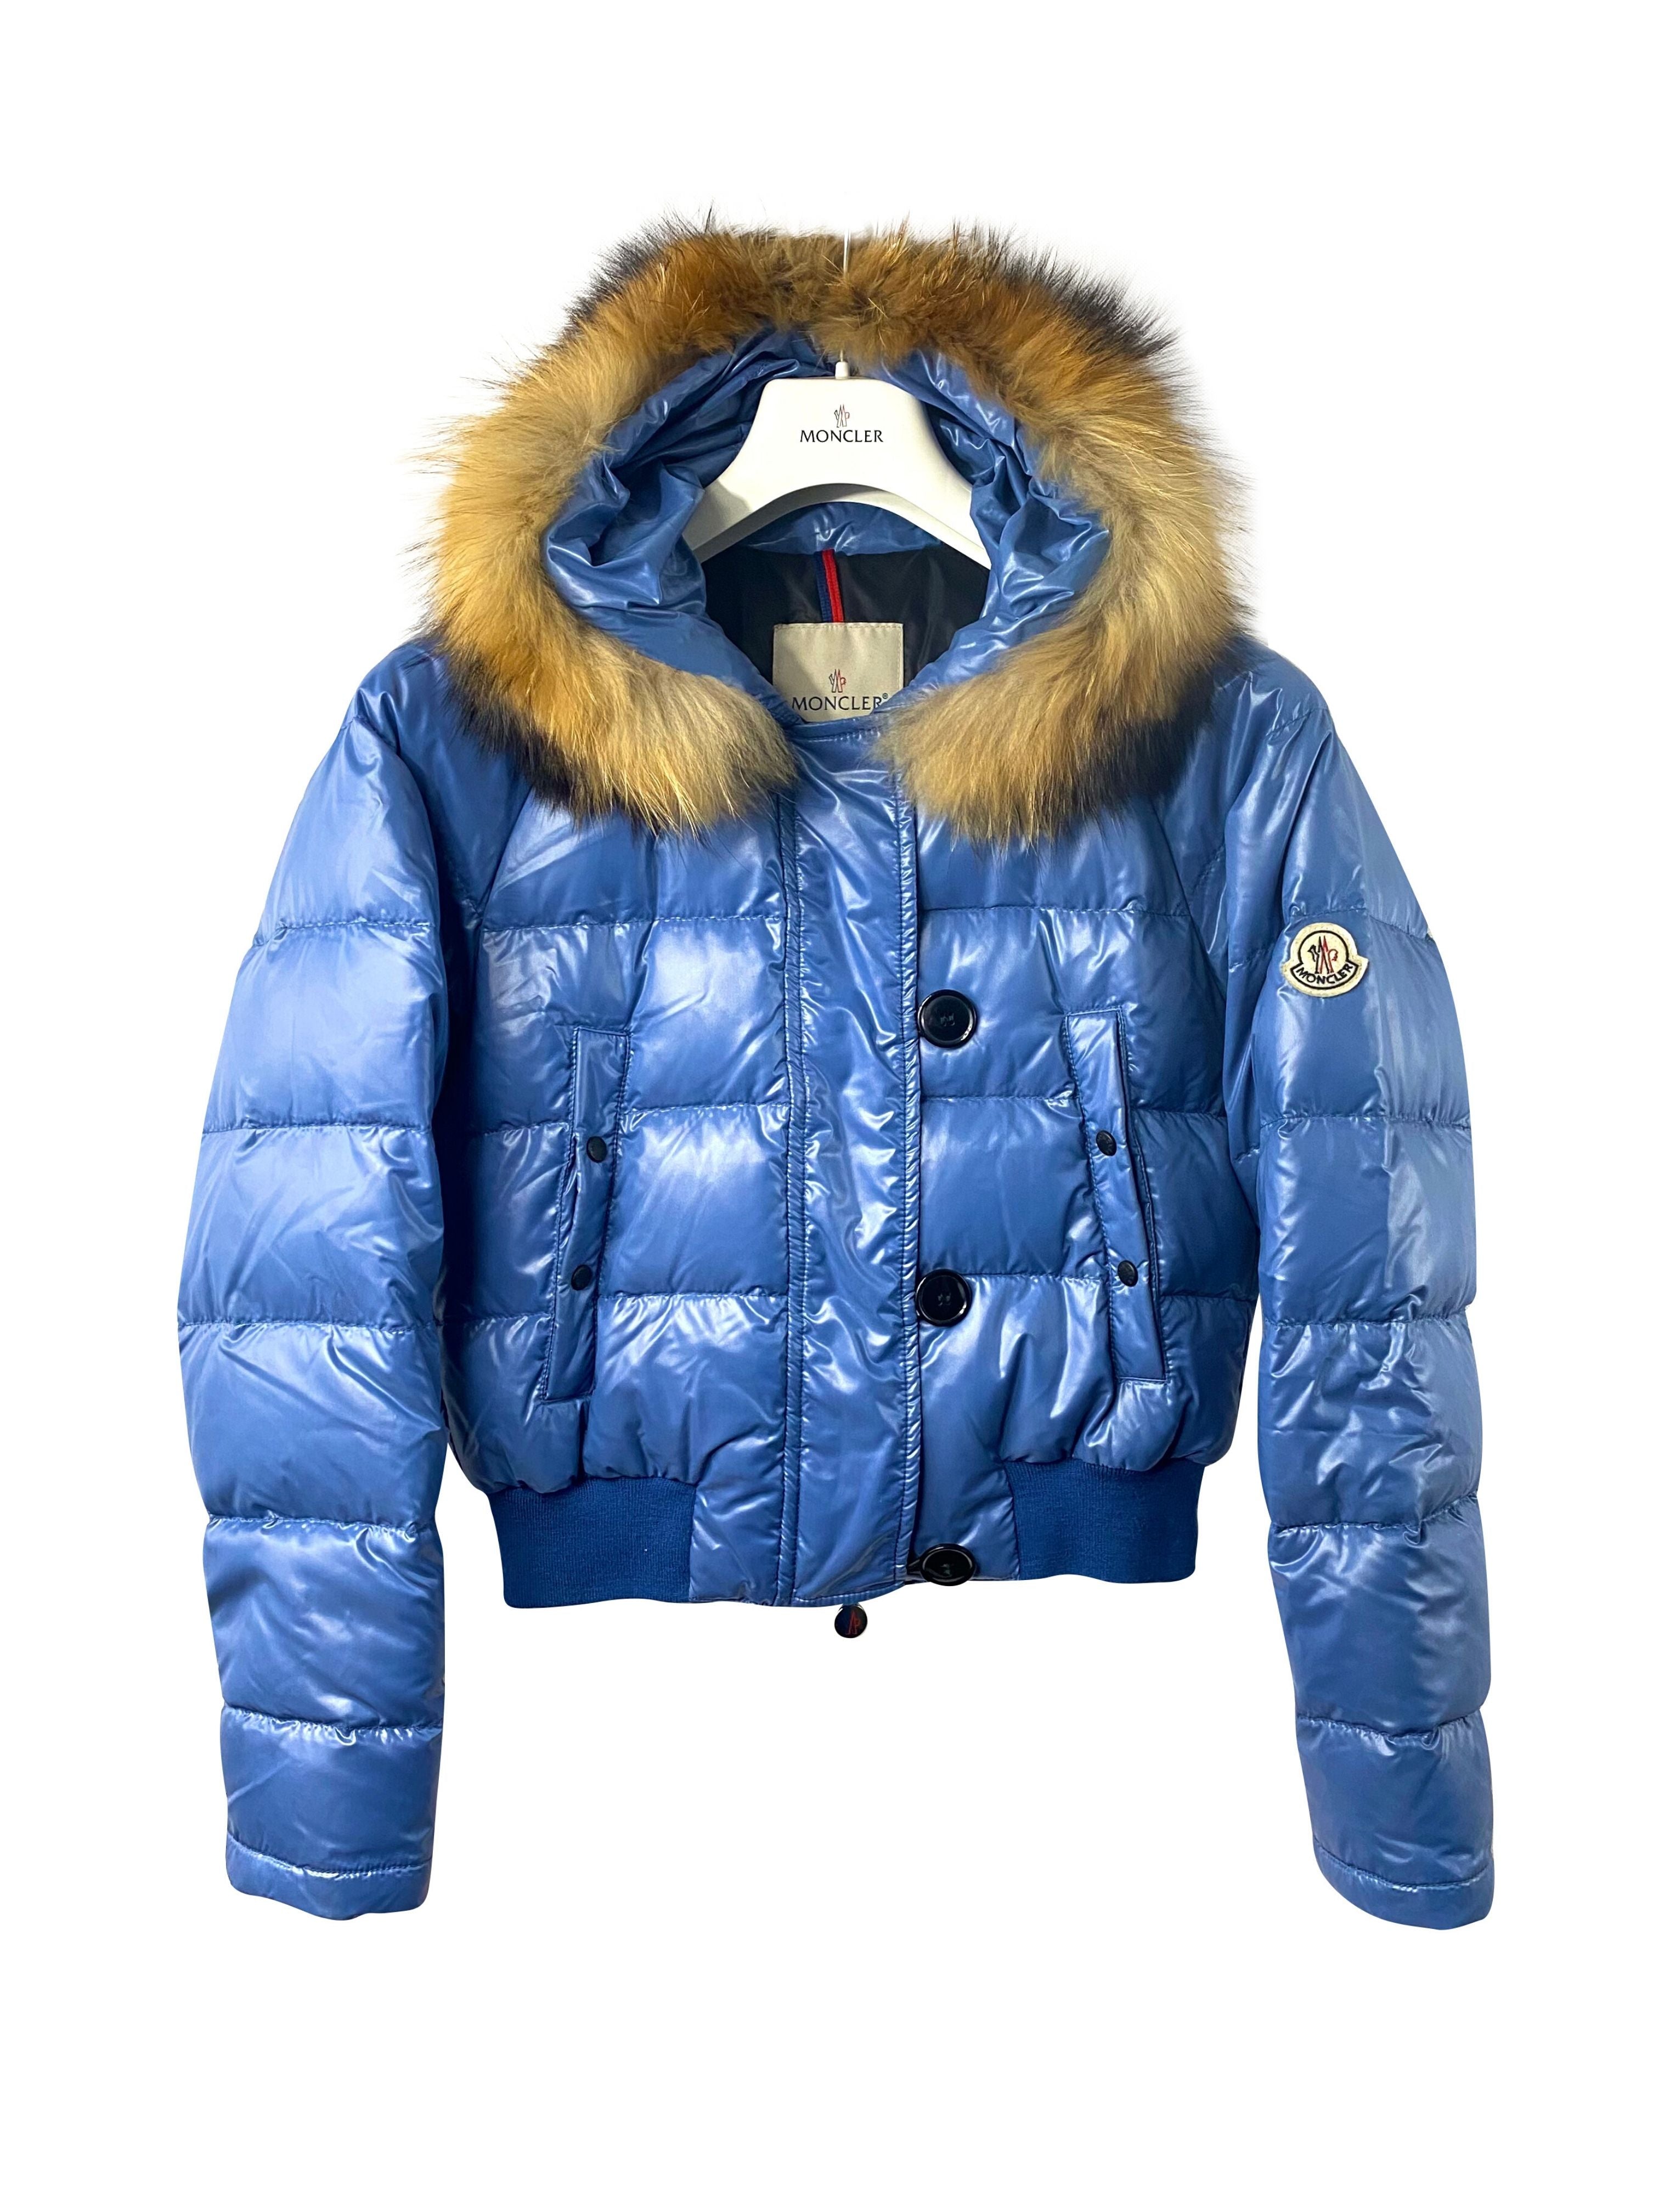 Moncler Bulgarie - Size 0 - HB Authenticated Luxury Wear